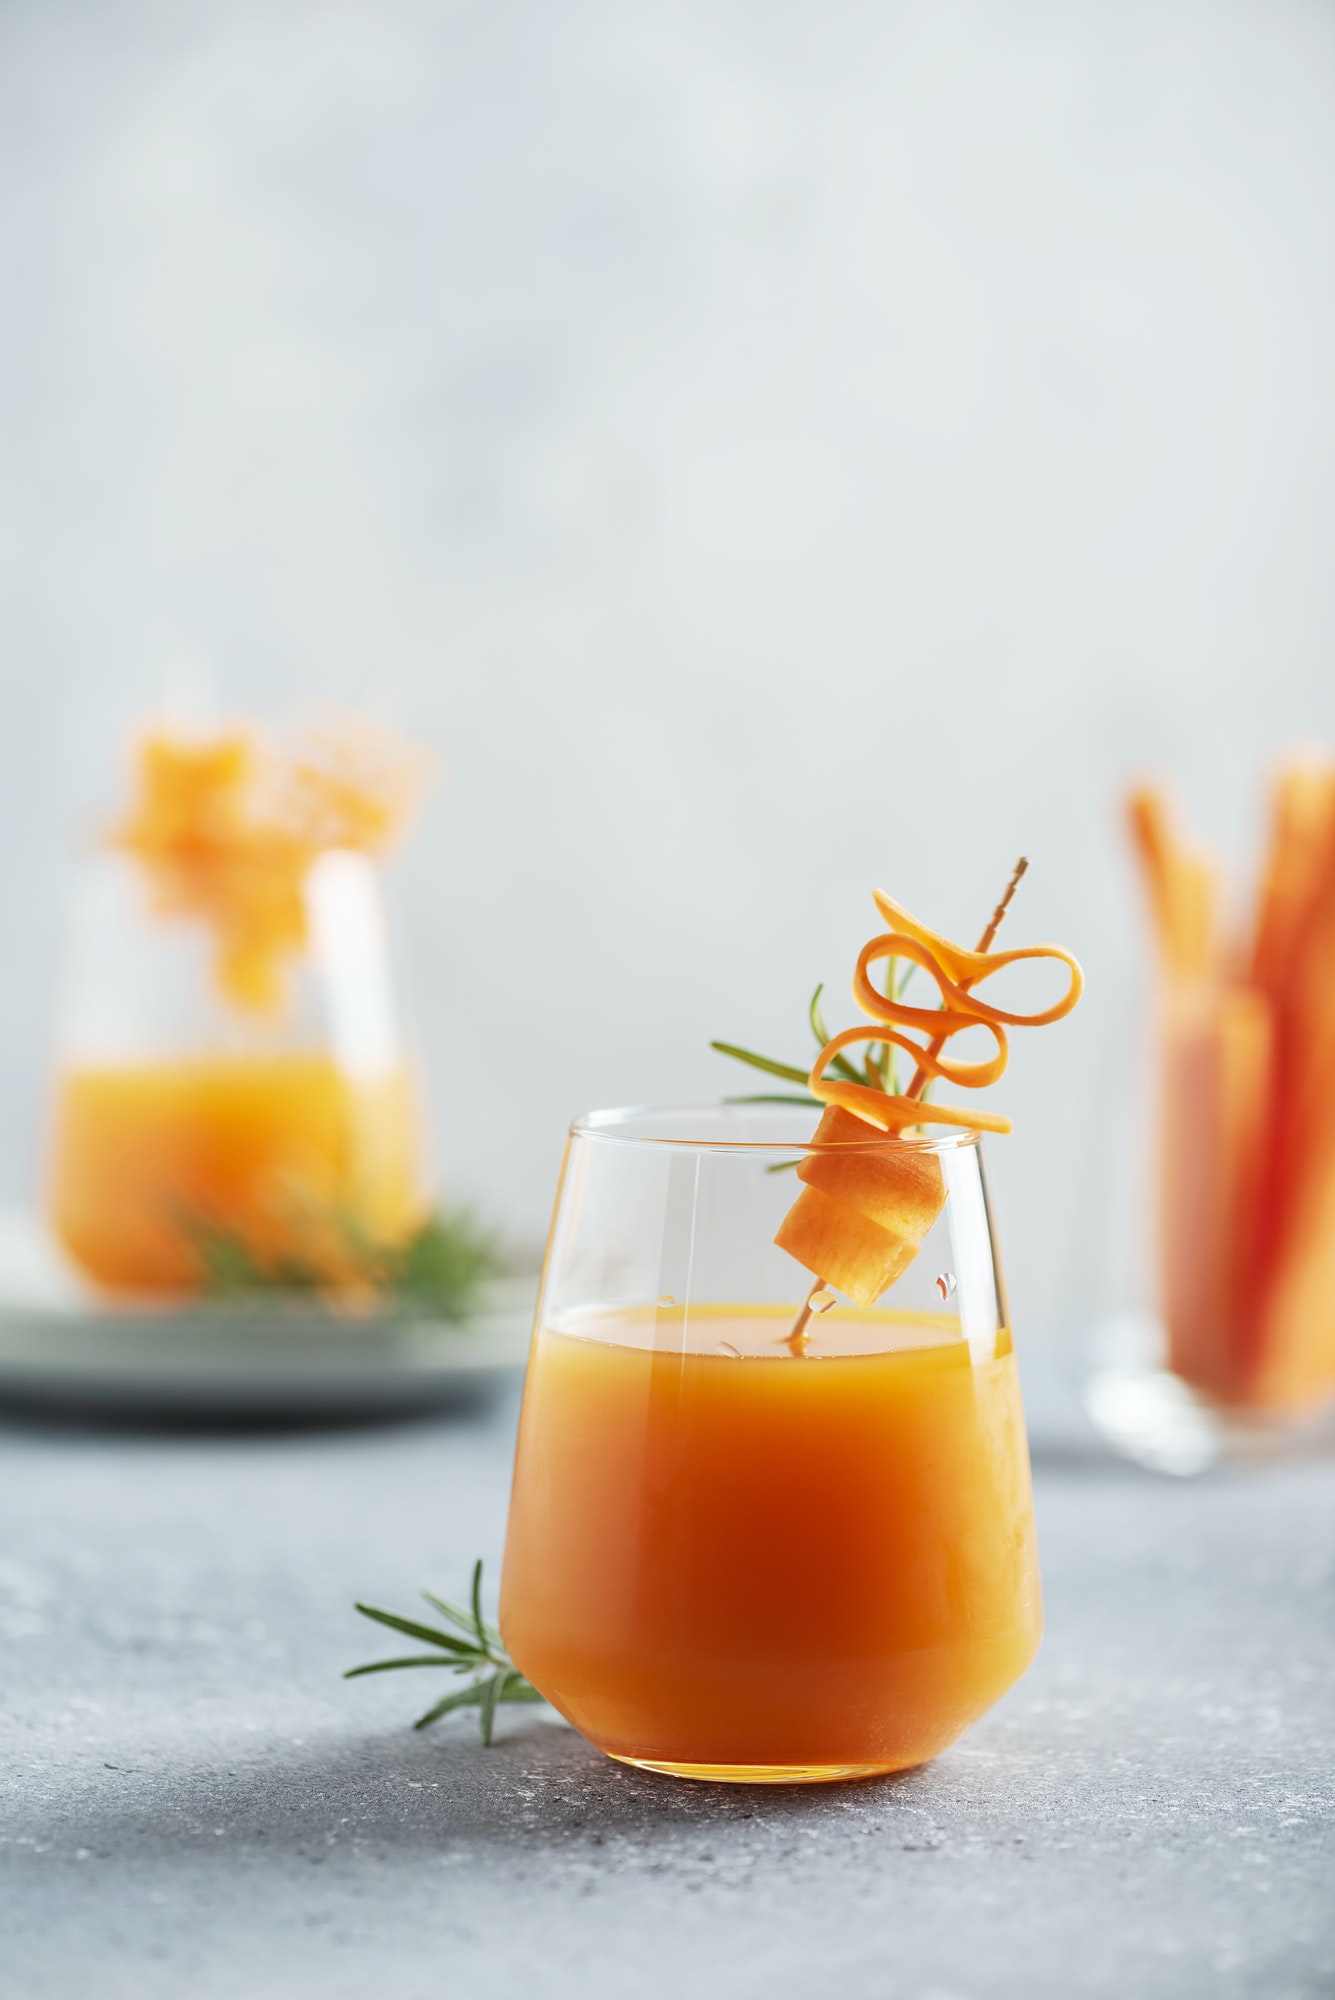 Healthy fresh juice with carrot